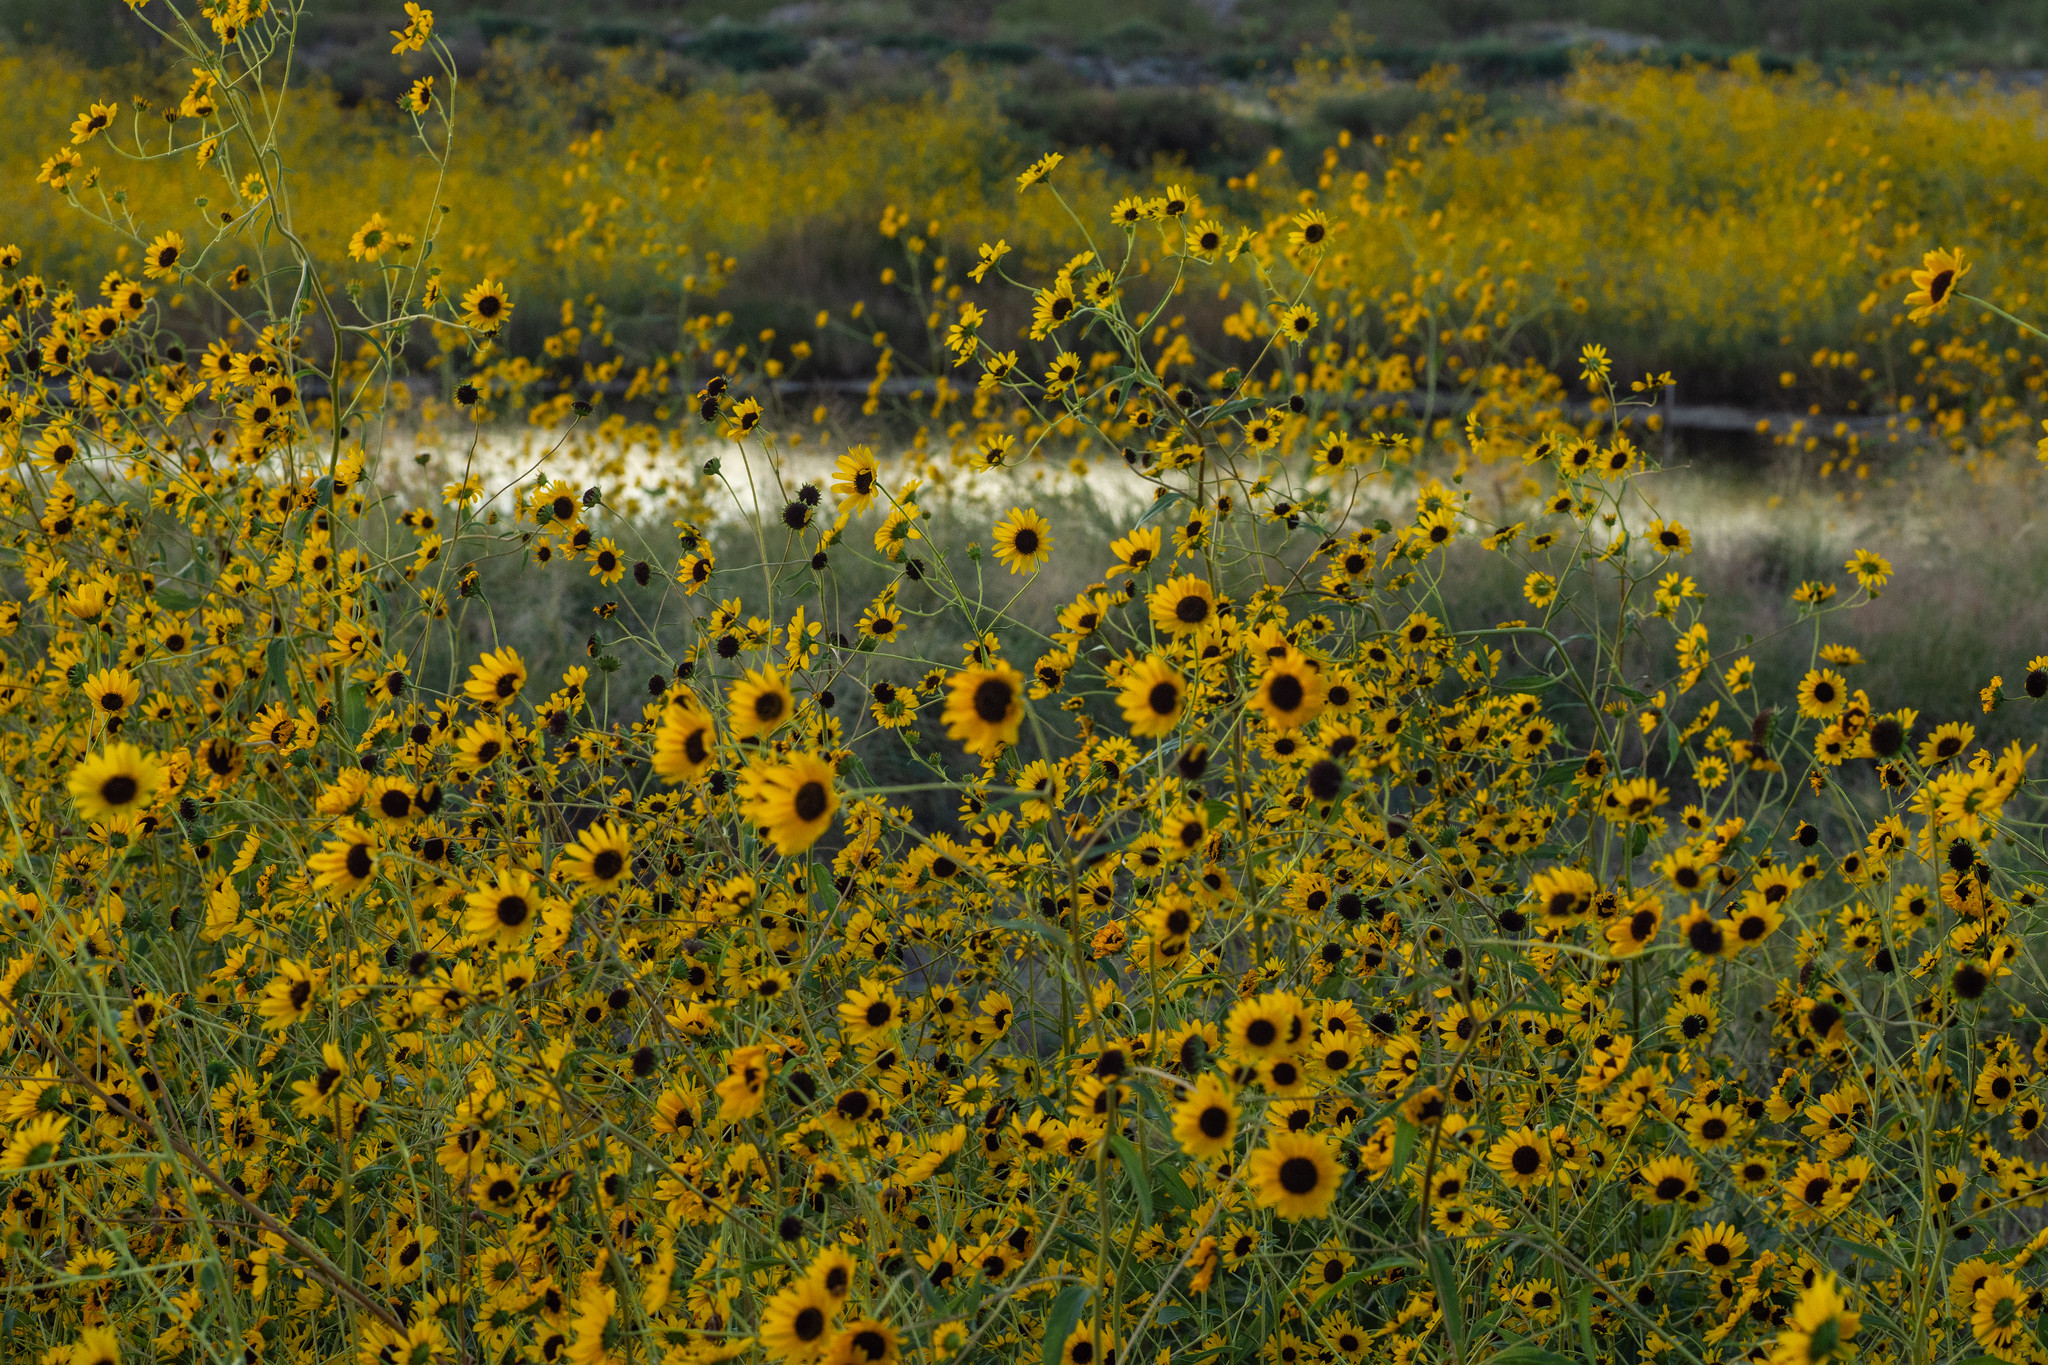 A field of blooming bright yellow sunflowers.